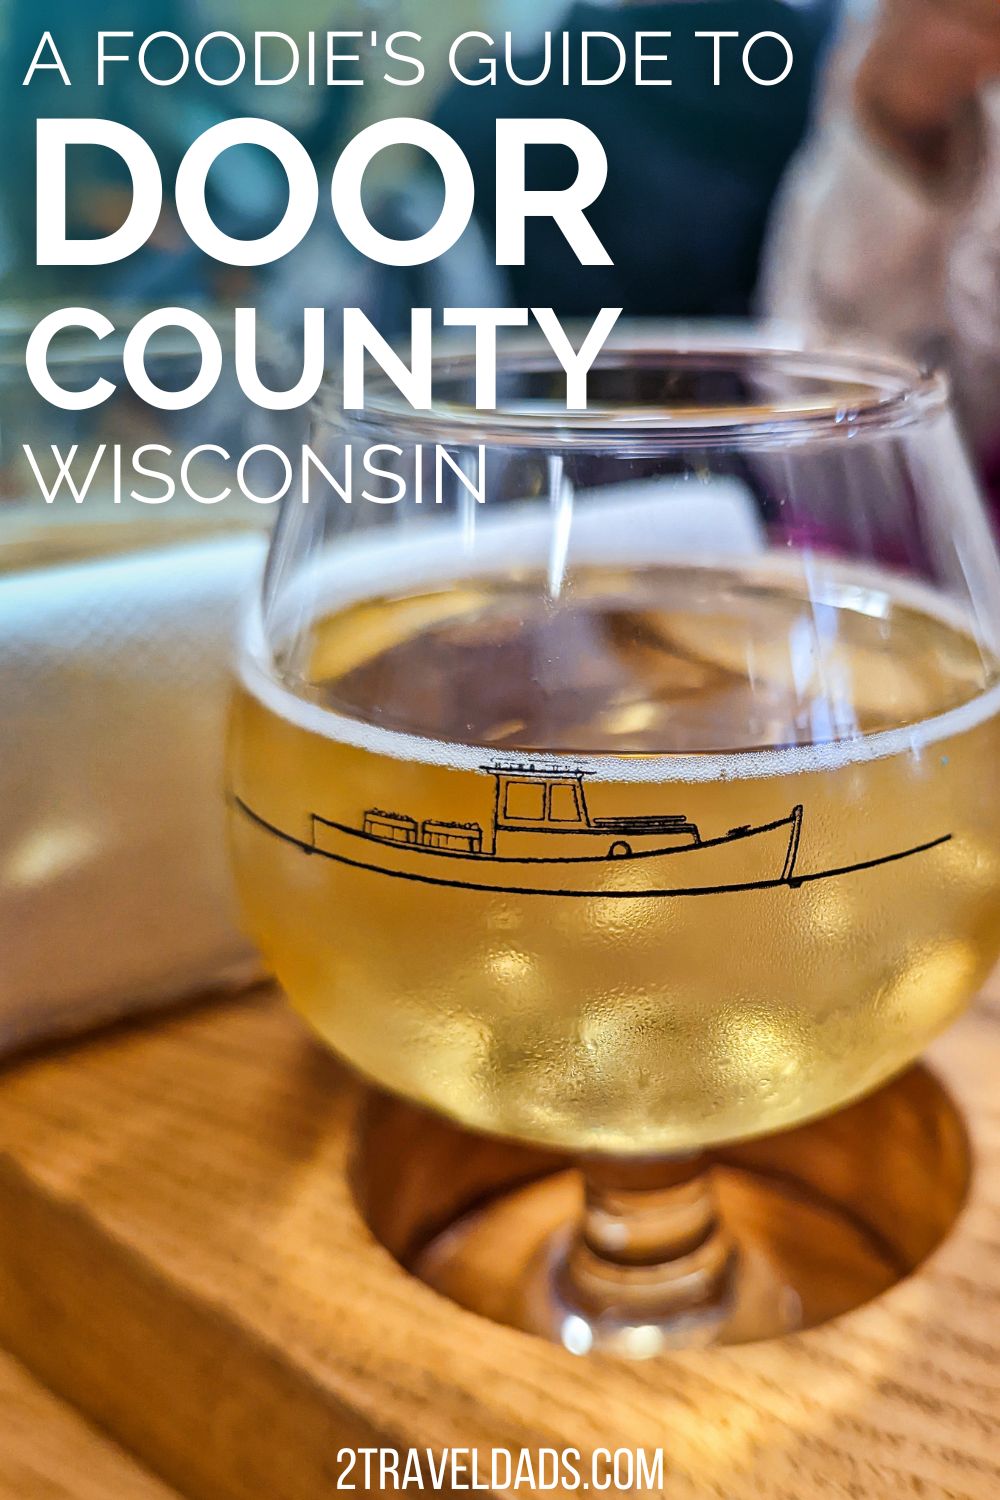 Door County, Wisconsin is a foodie paradise with cheese, cider and great places to eat all along the peninsula. Guide to farm stands, tasting rooms and great eats in Door County.